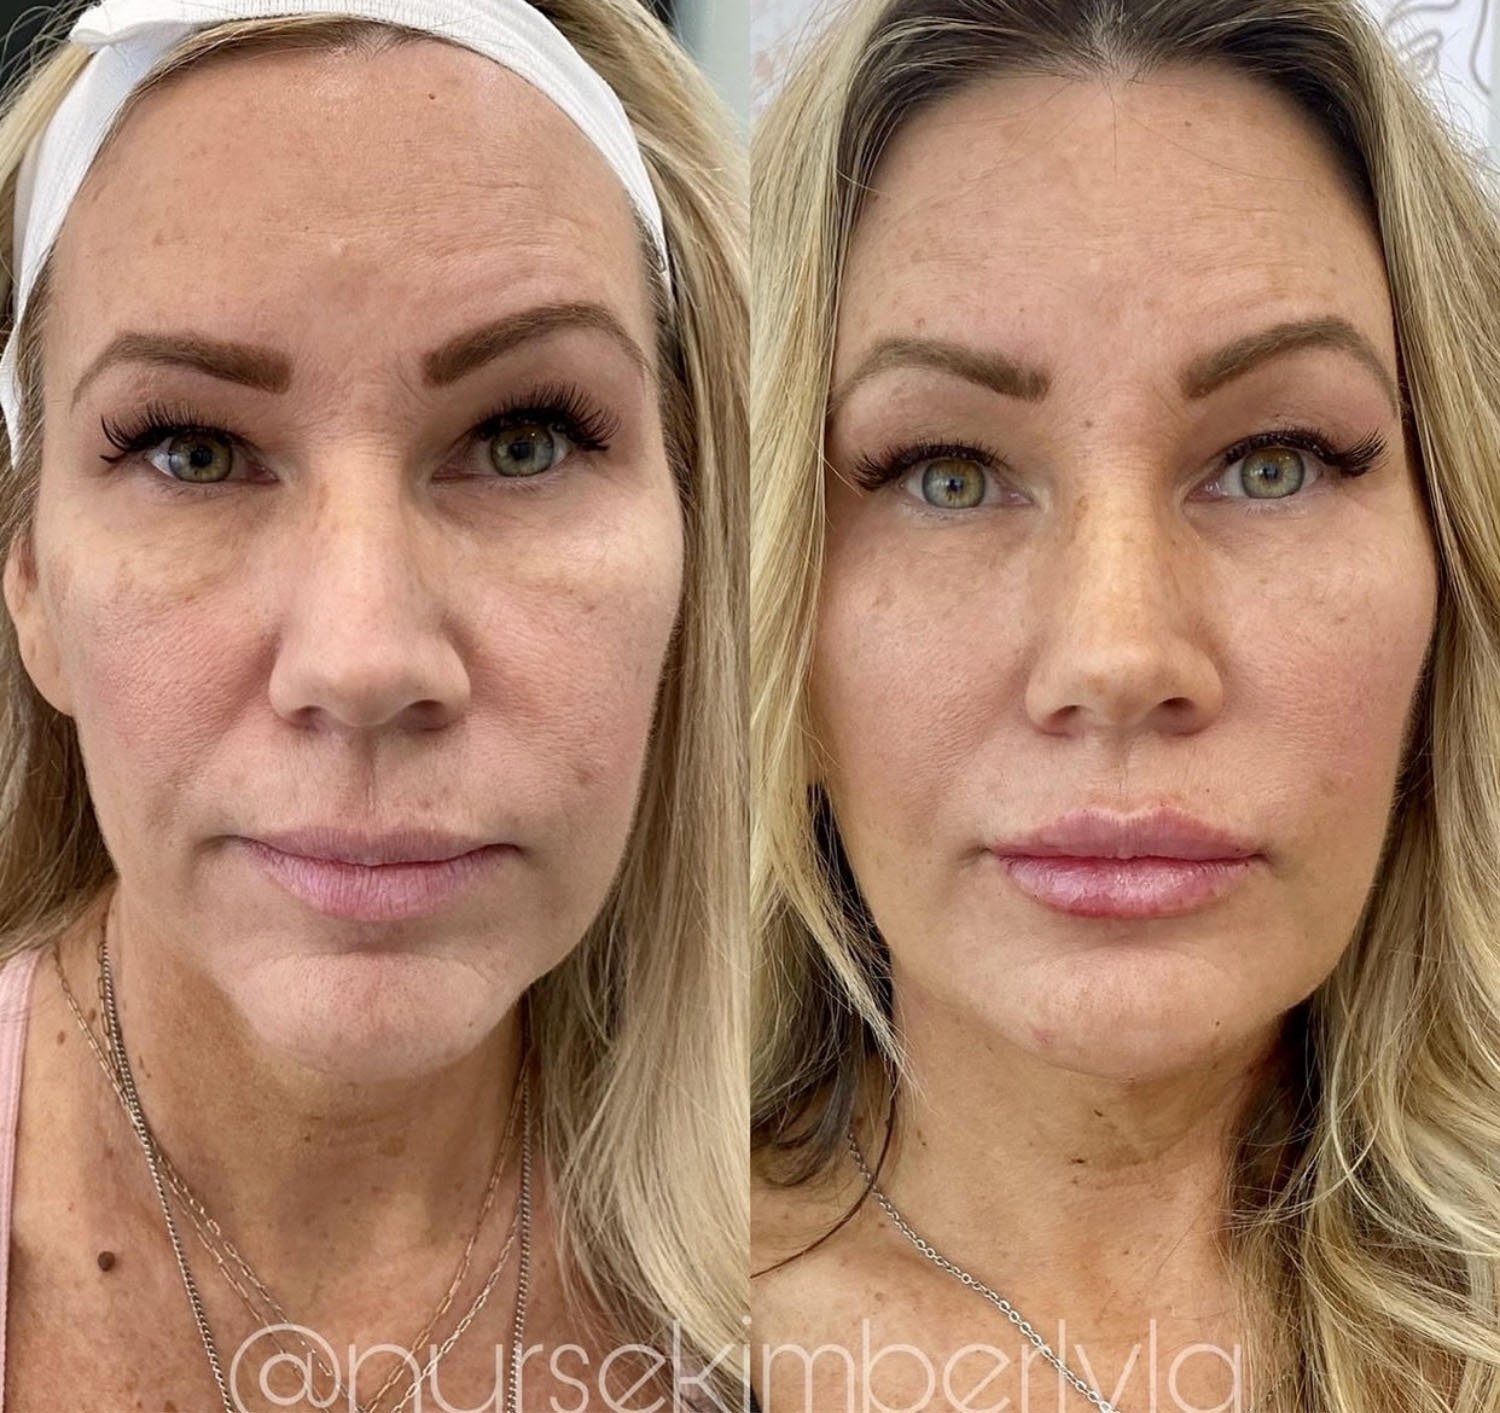 Kimberly botox injections before and after.jpg